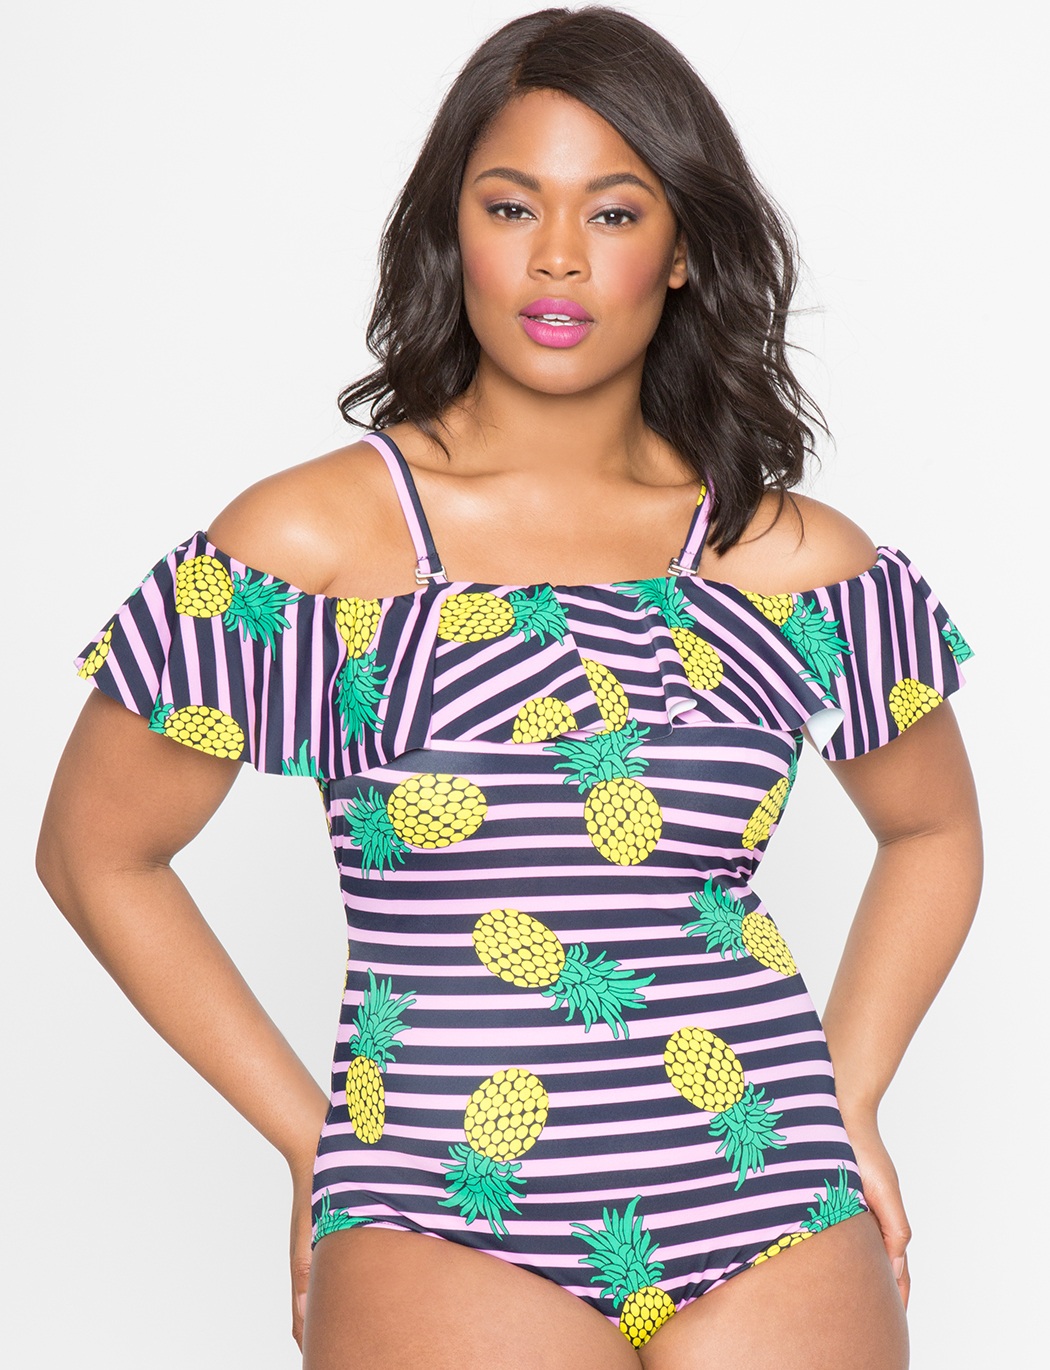 Sexy Plus Size Swimsuits To Rock This Summer Stylish Curves 5127